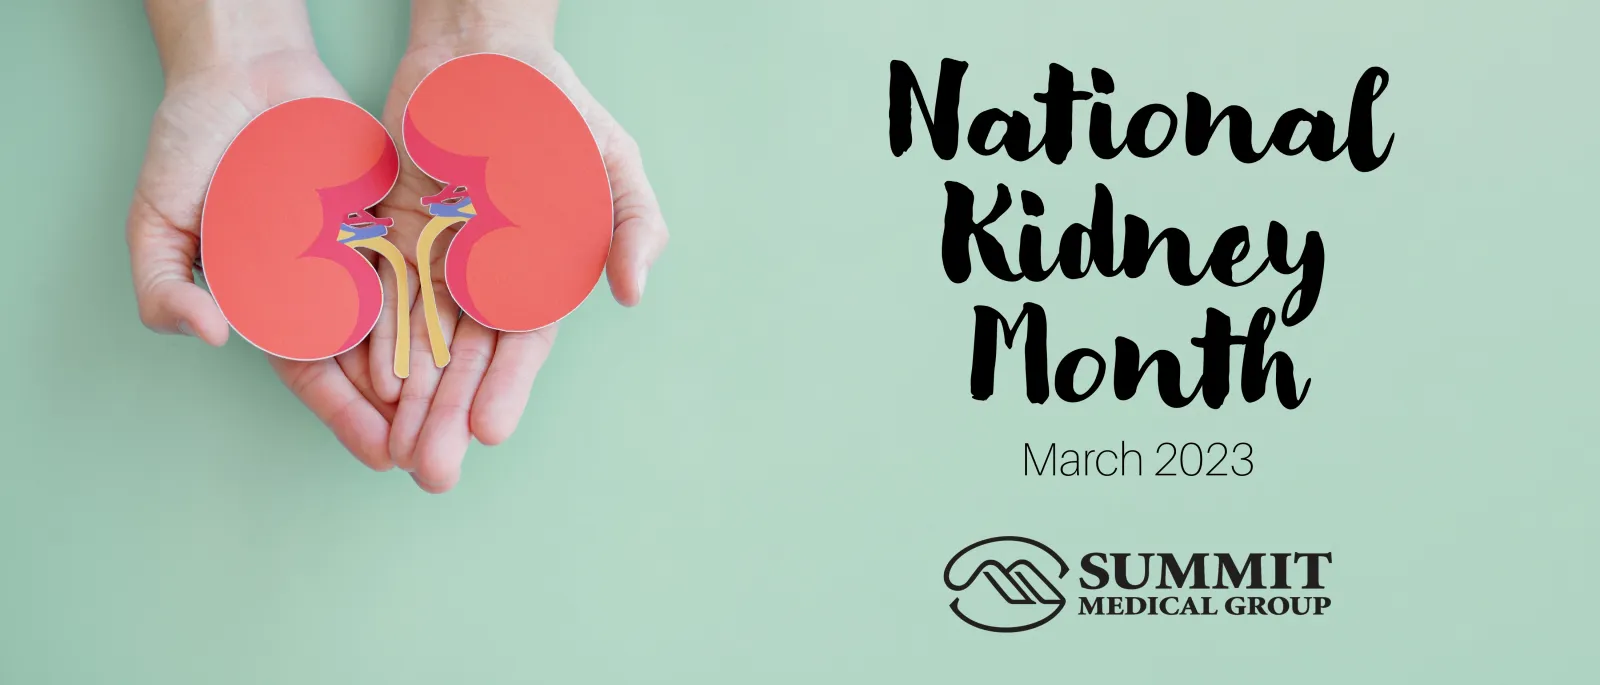 national kidney month